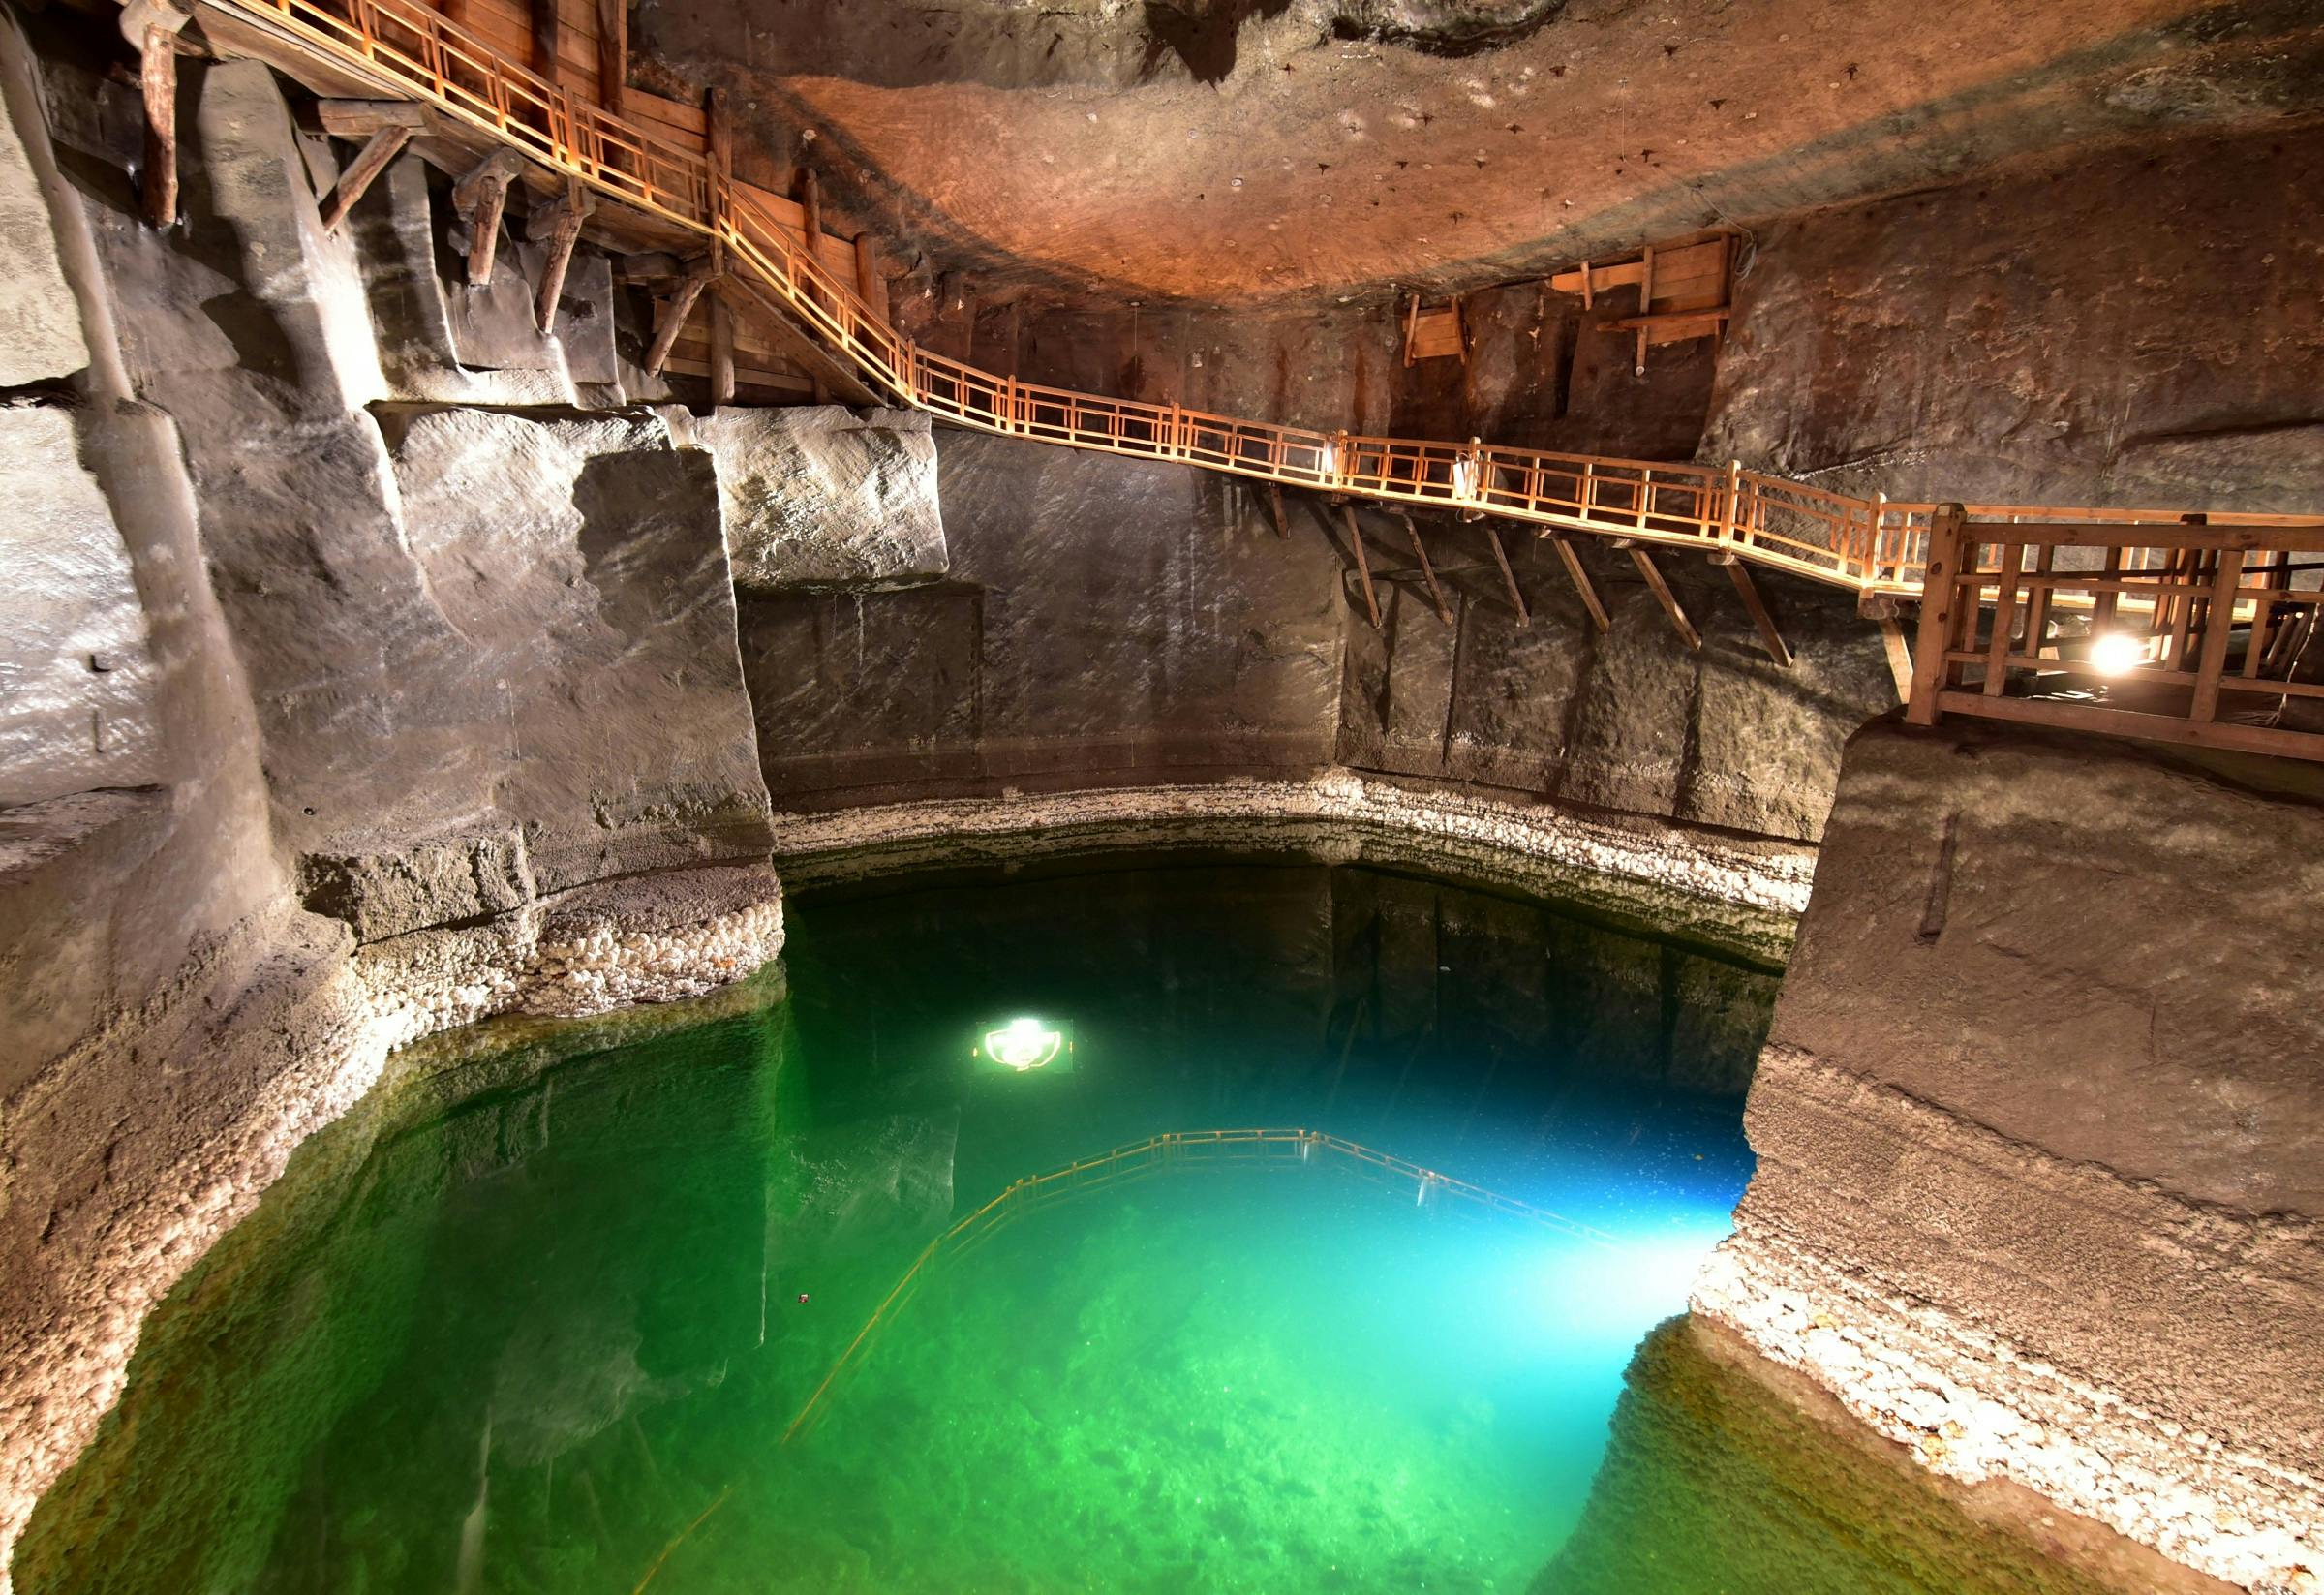 Skip-the-line ticket and guided tour to Wieliczka Salt Mine